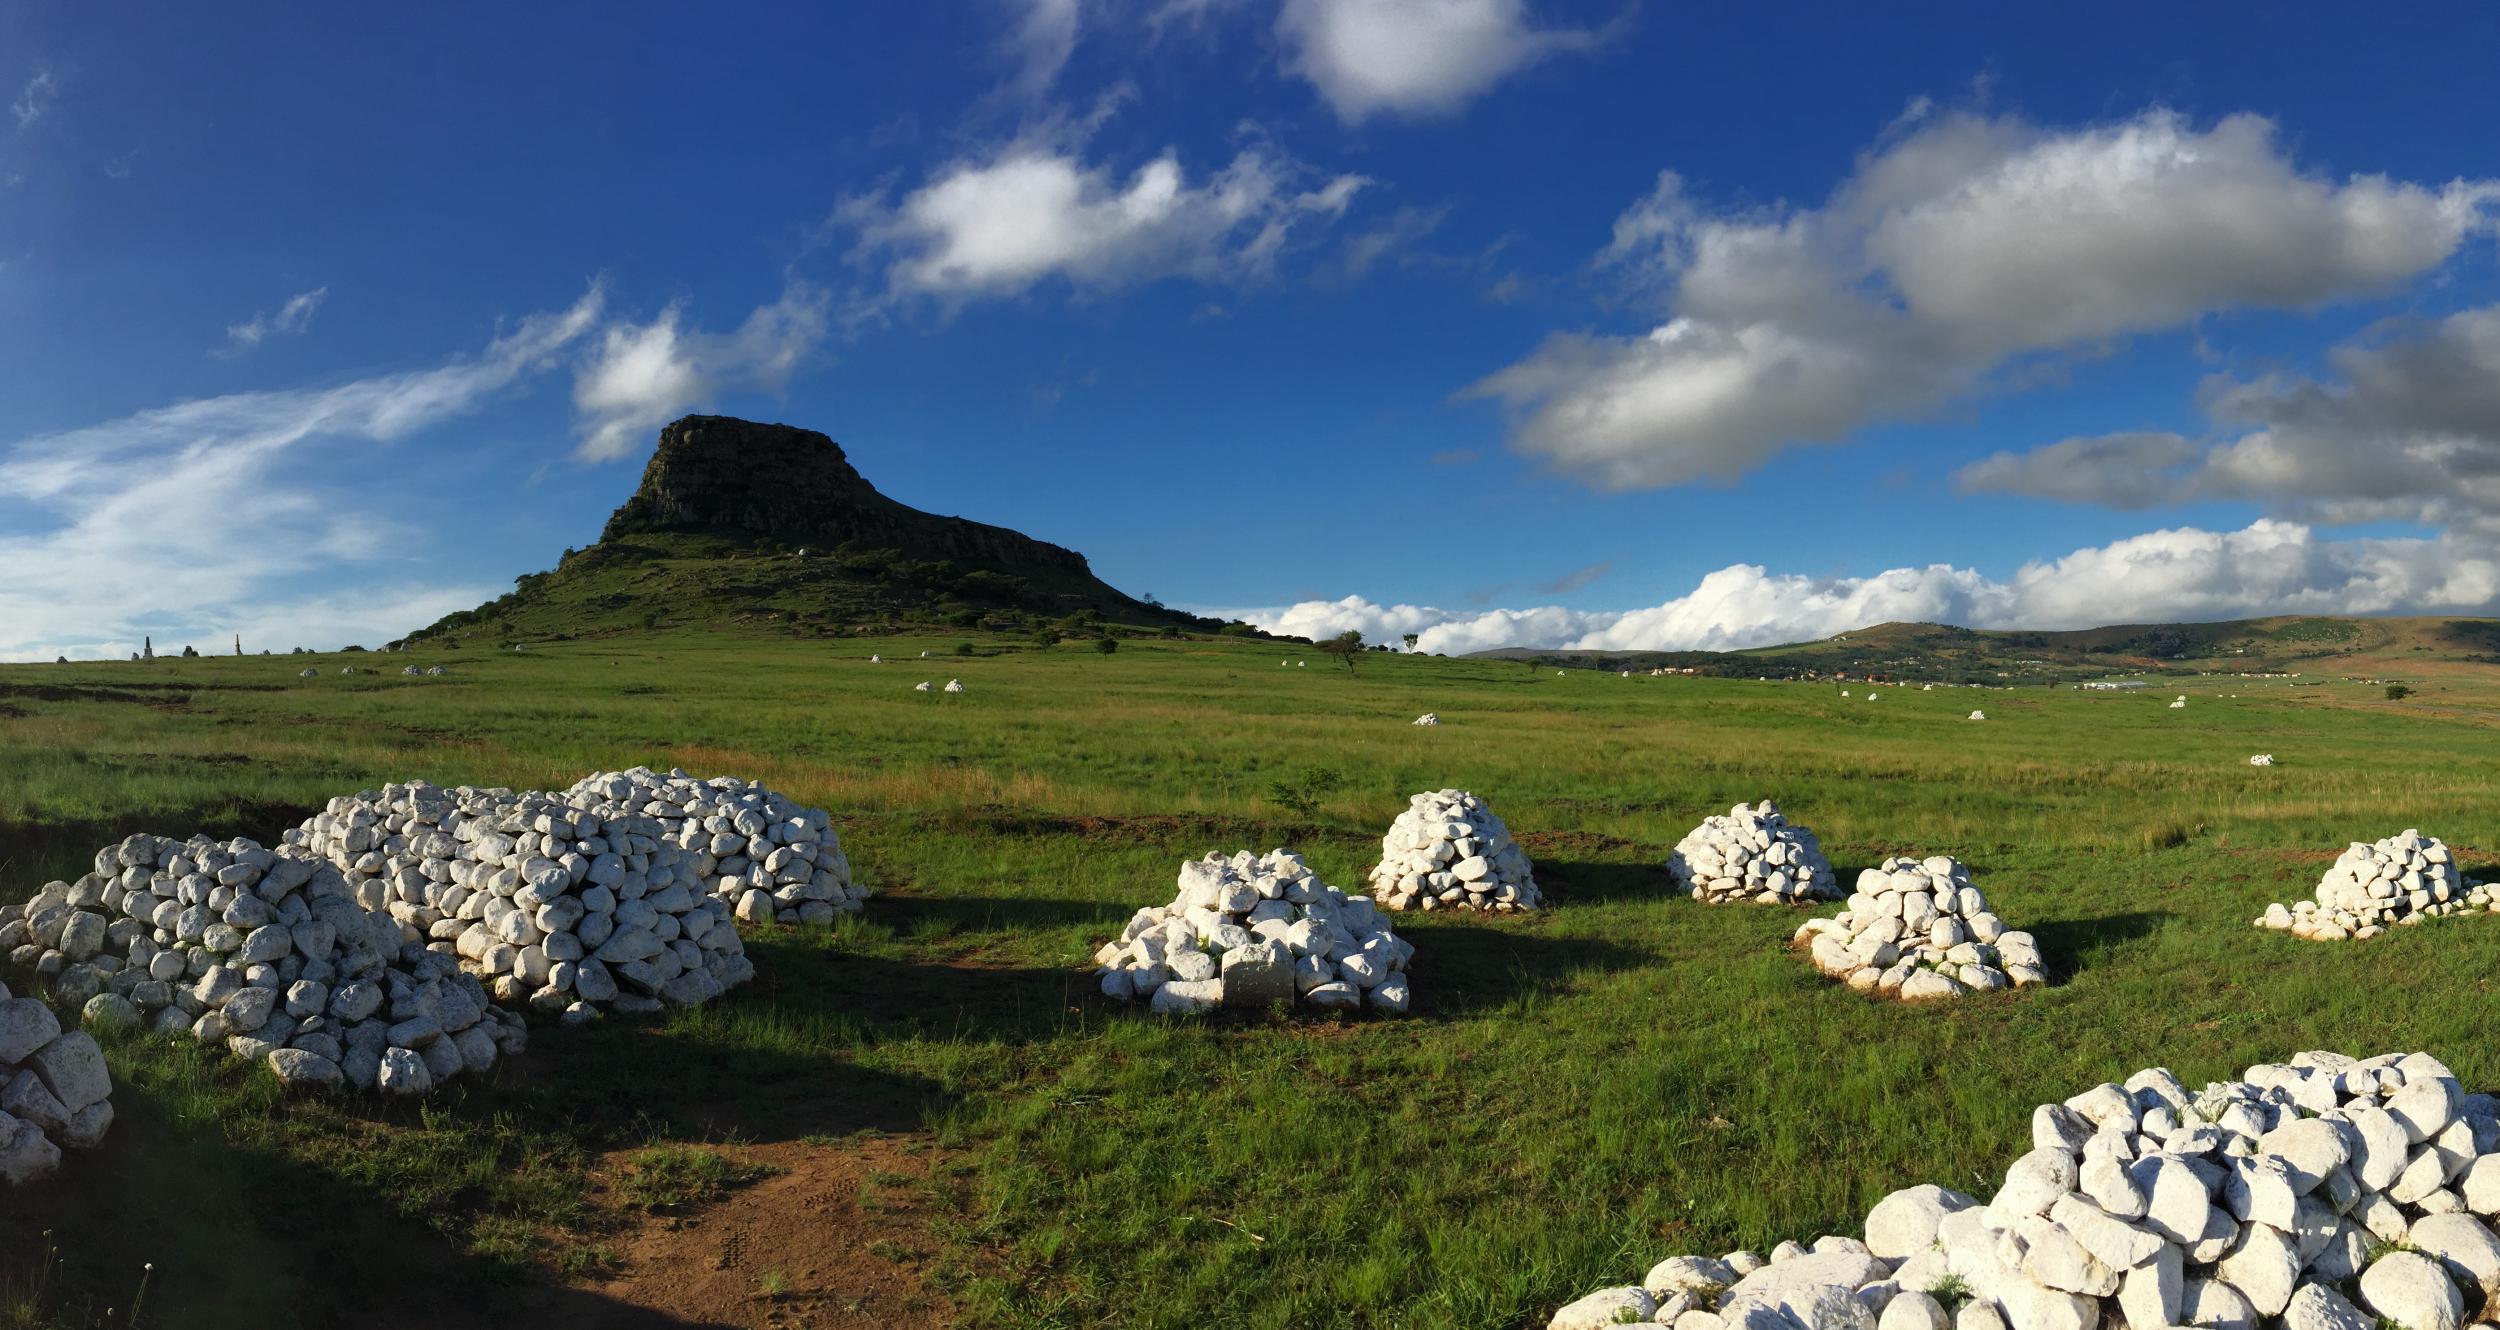 Mounds of white stone mark the remains of unnamed British soldiers at Isandlwana